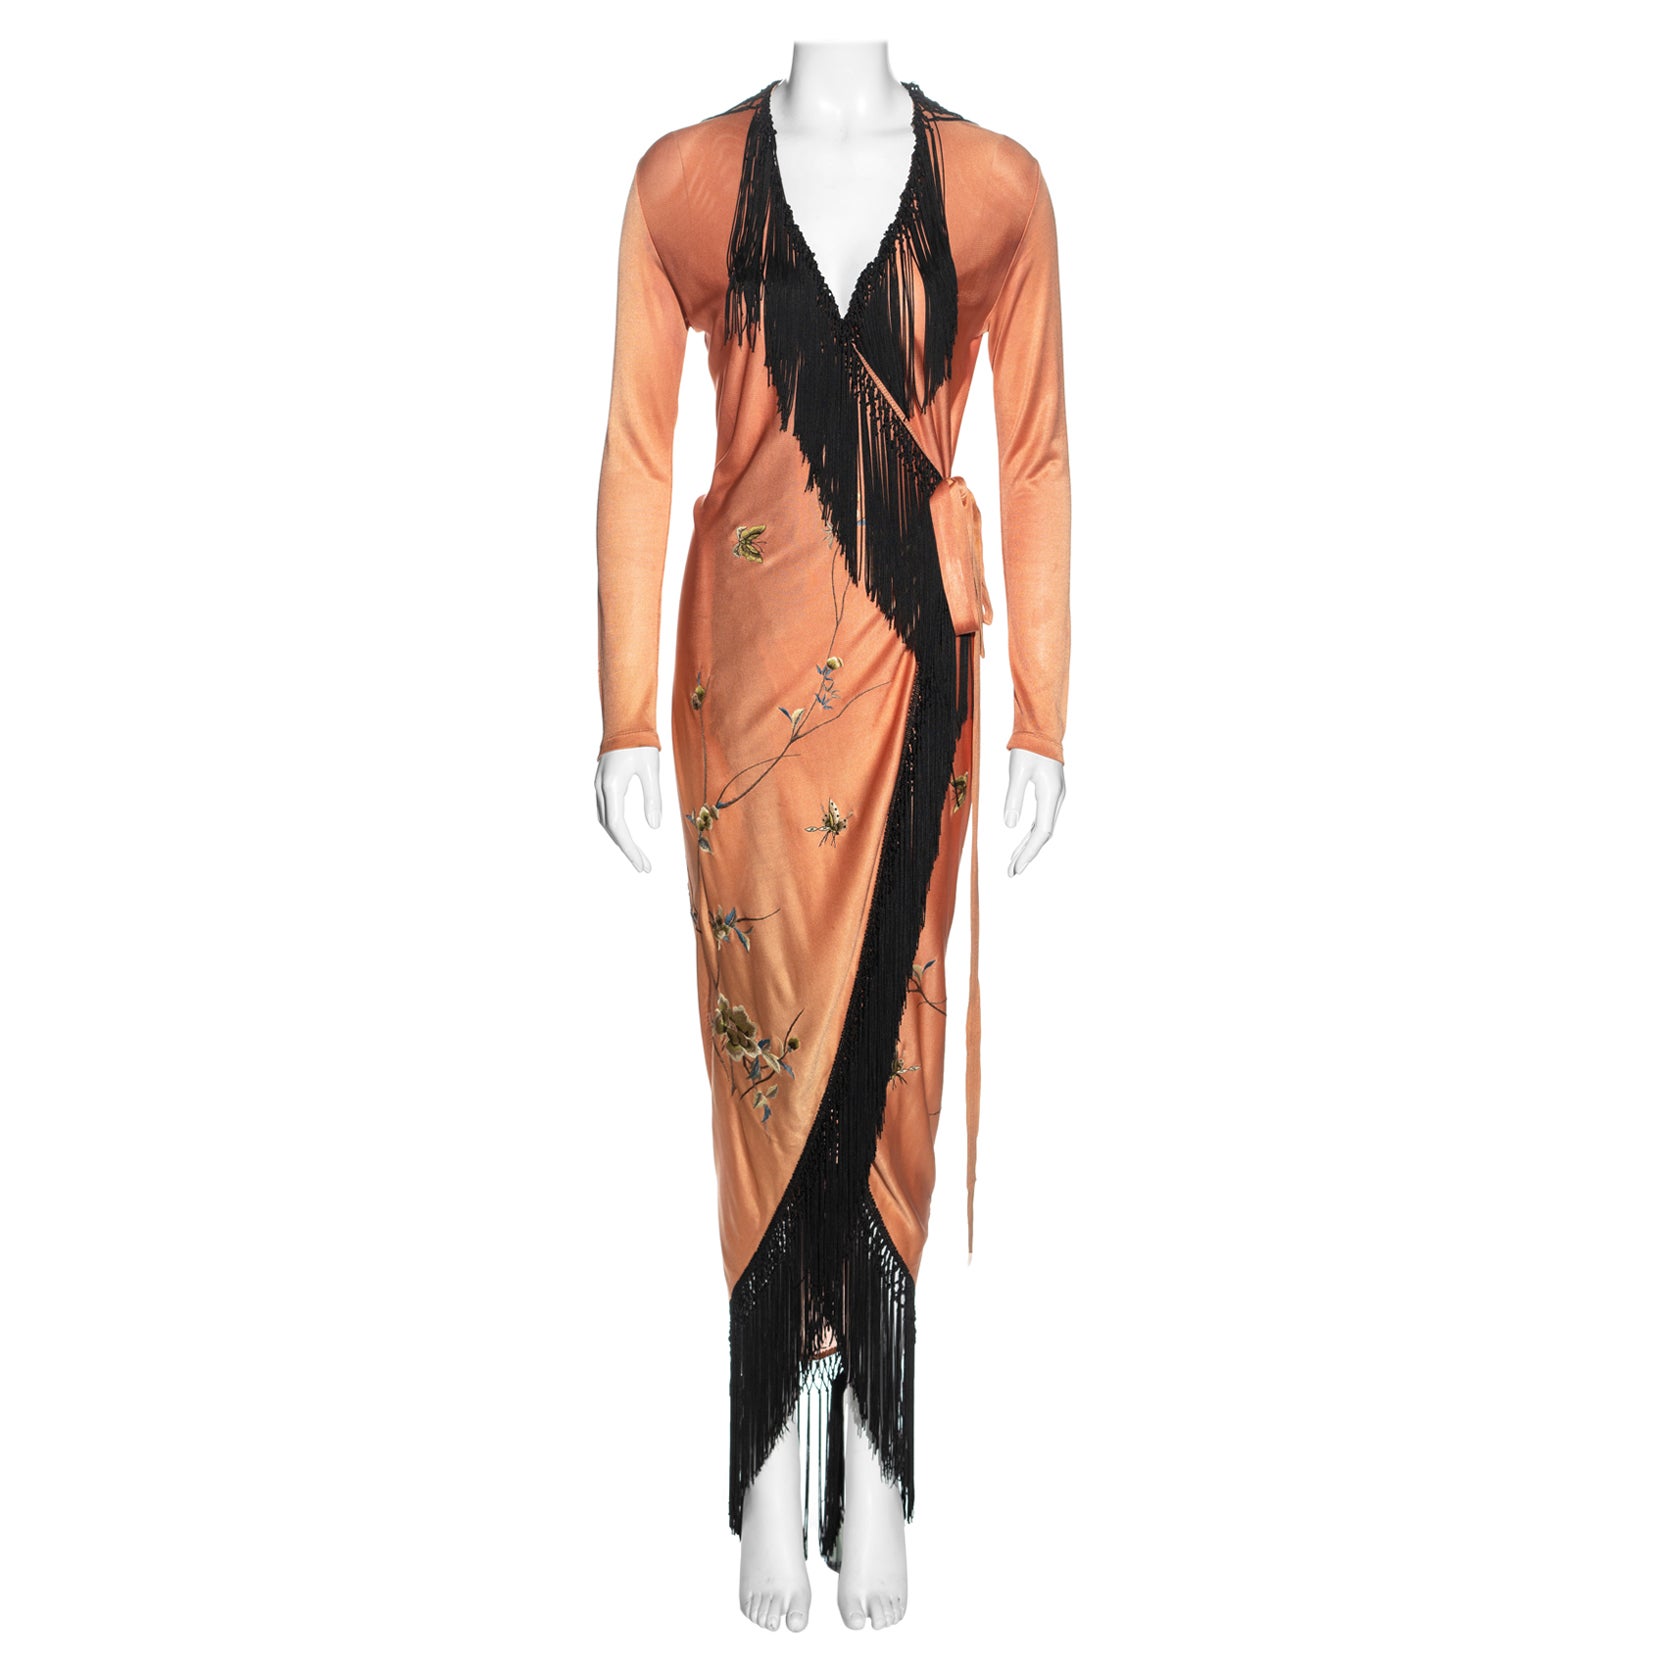 Jean Paul Gaultier pale peach wrap dress with floral embroidery, c. 1991-1994